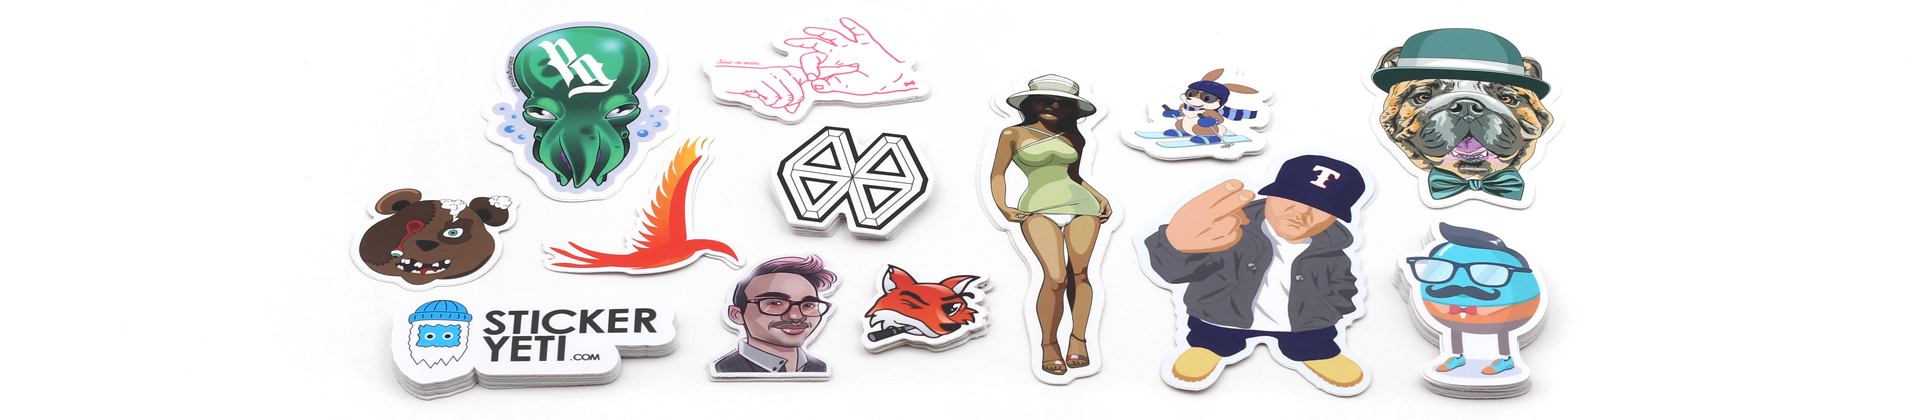 Stickers for illustrators, graphic artist, art stickers print from drawing